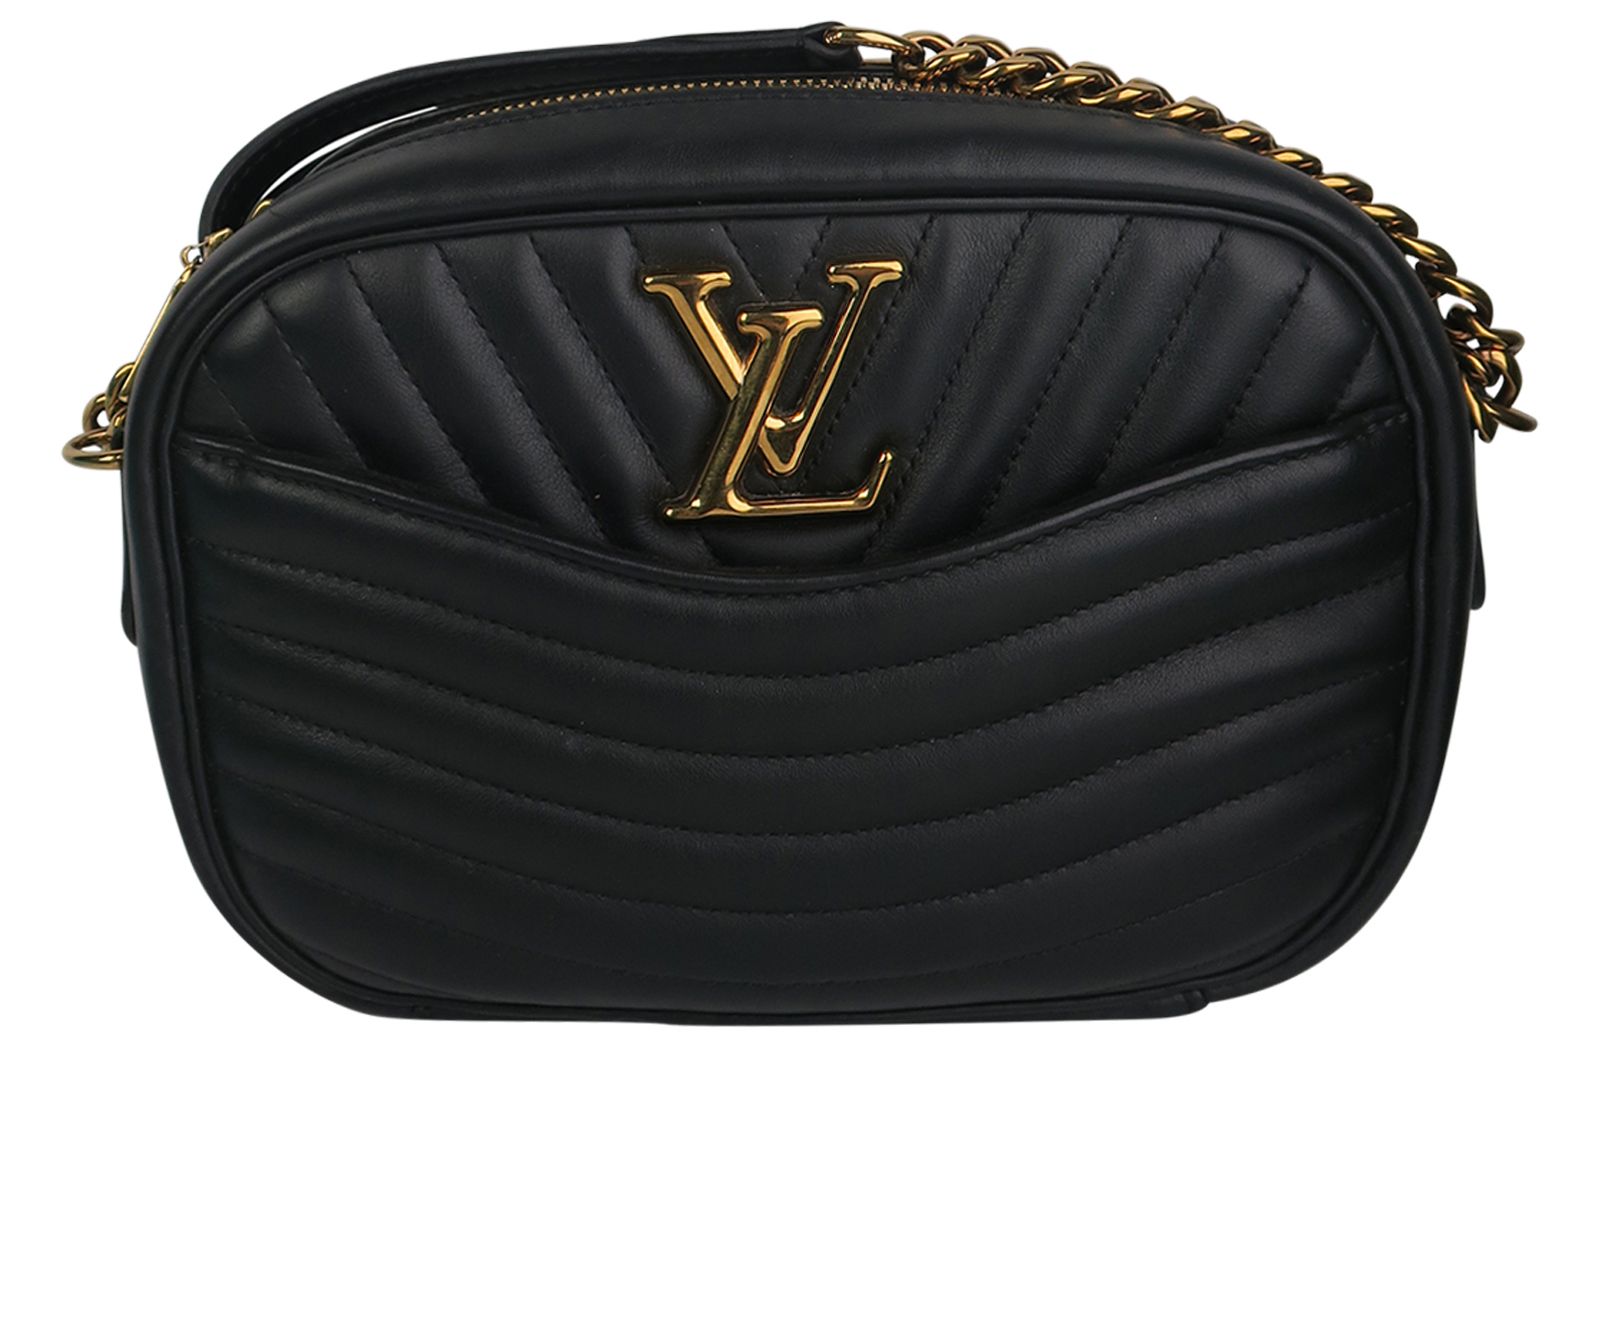 LOUIS VUITTON NEW WAVE REVIEW: WHY YOU NEED TO FORGET ABOUT THE